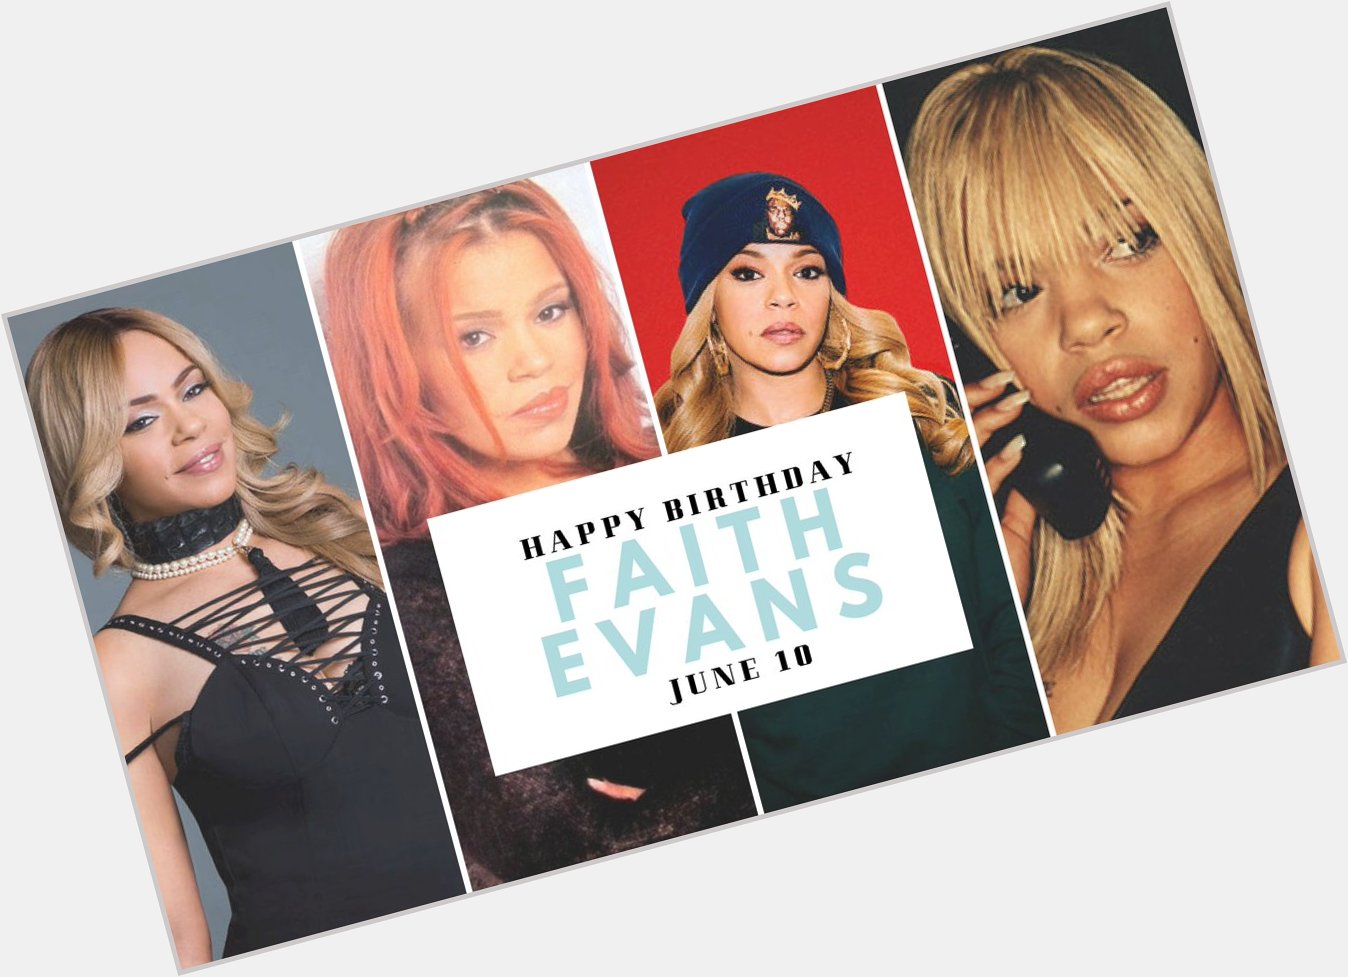 Happy birthday to Faith Evans is an American singer-songwriter, record producer, and actress. 